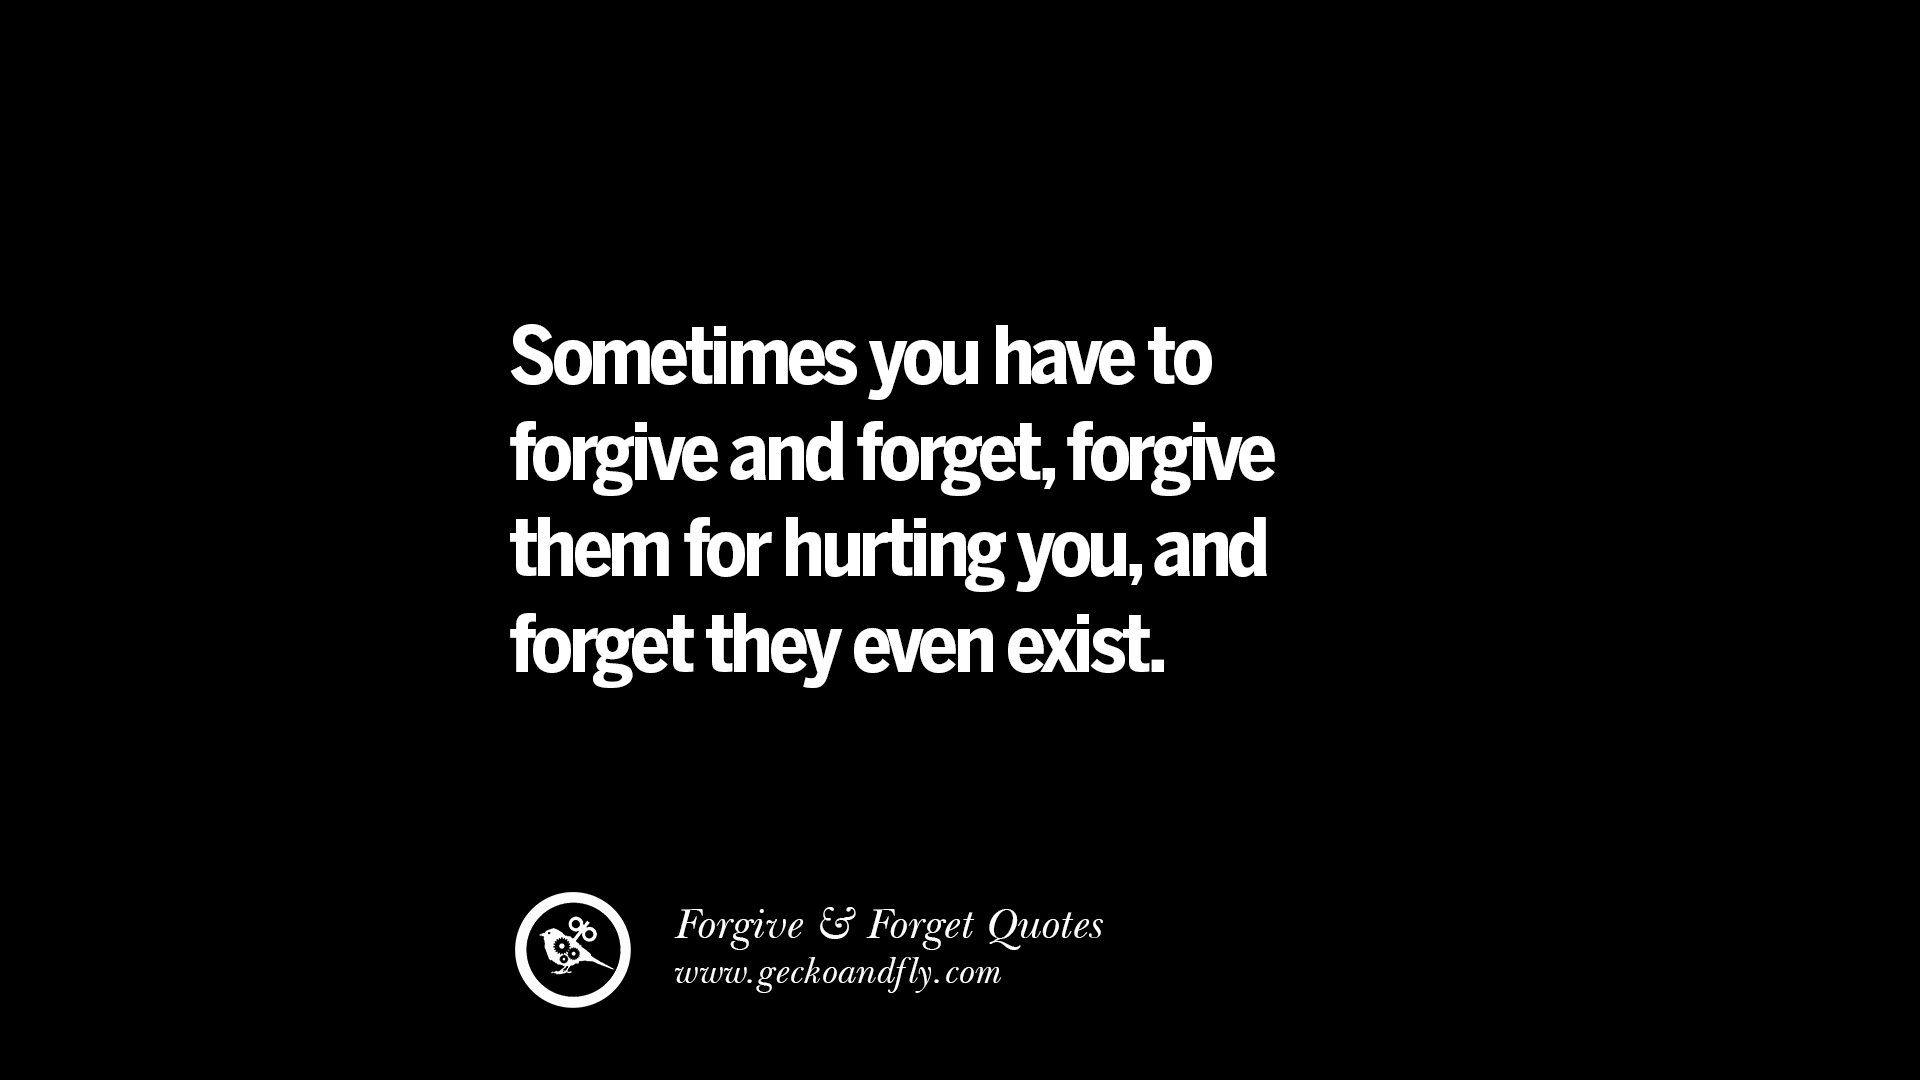 Quotes On Forgive And Forget When Someone Hurts You In A Relationship